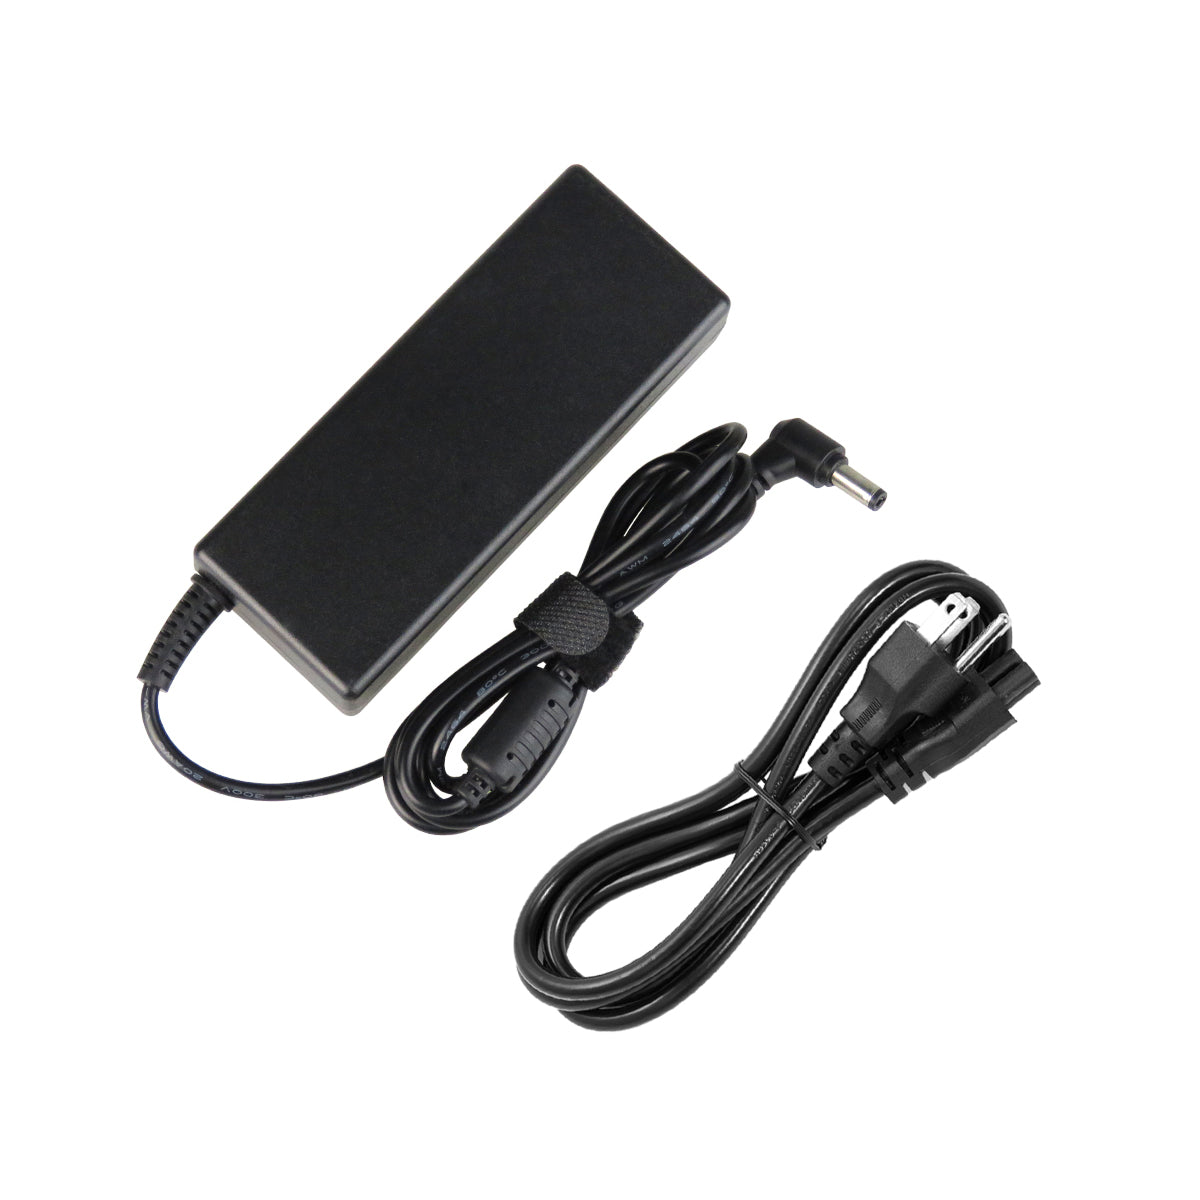 AC Adapter Charger for Toshiba Satellite L850 Notebook.